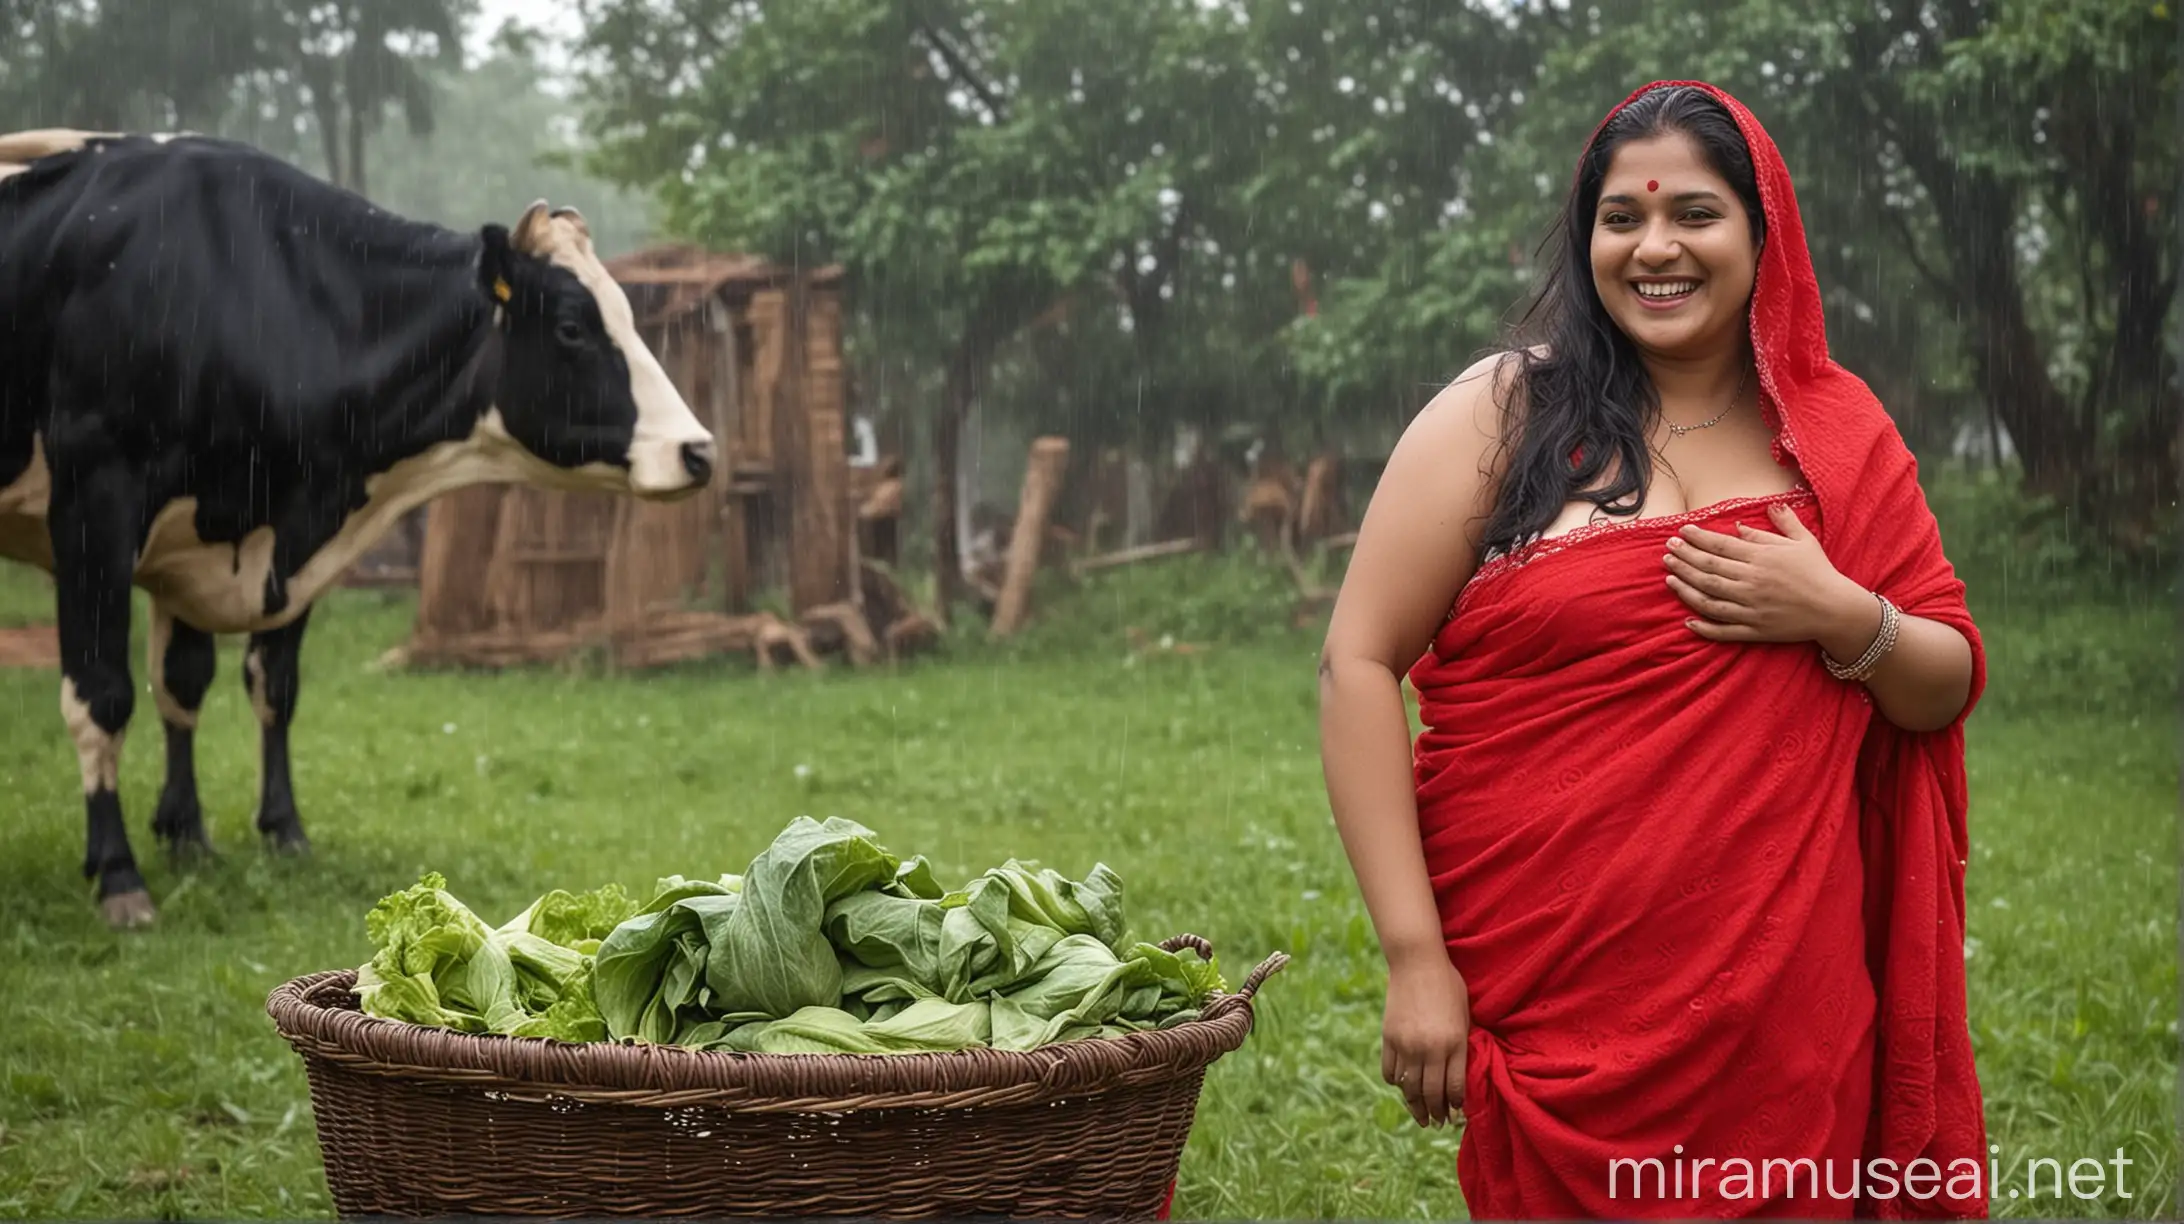 desi mature   very fat aunty 47 years old  fat and wearing sindur, and magalsutra  and wearing a big neck lace  . she has curvy muscular figure with big belly.  and she is happy and smiling and laughing and standing near a cow     . she is wearing a red bath towel, she has long thick hair.    its raining . she is standing holding a basket of vegetables.
